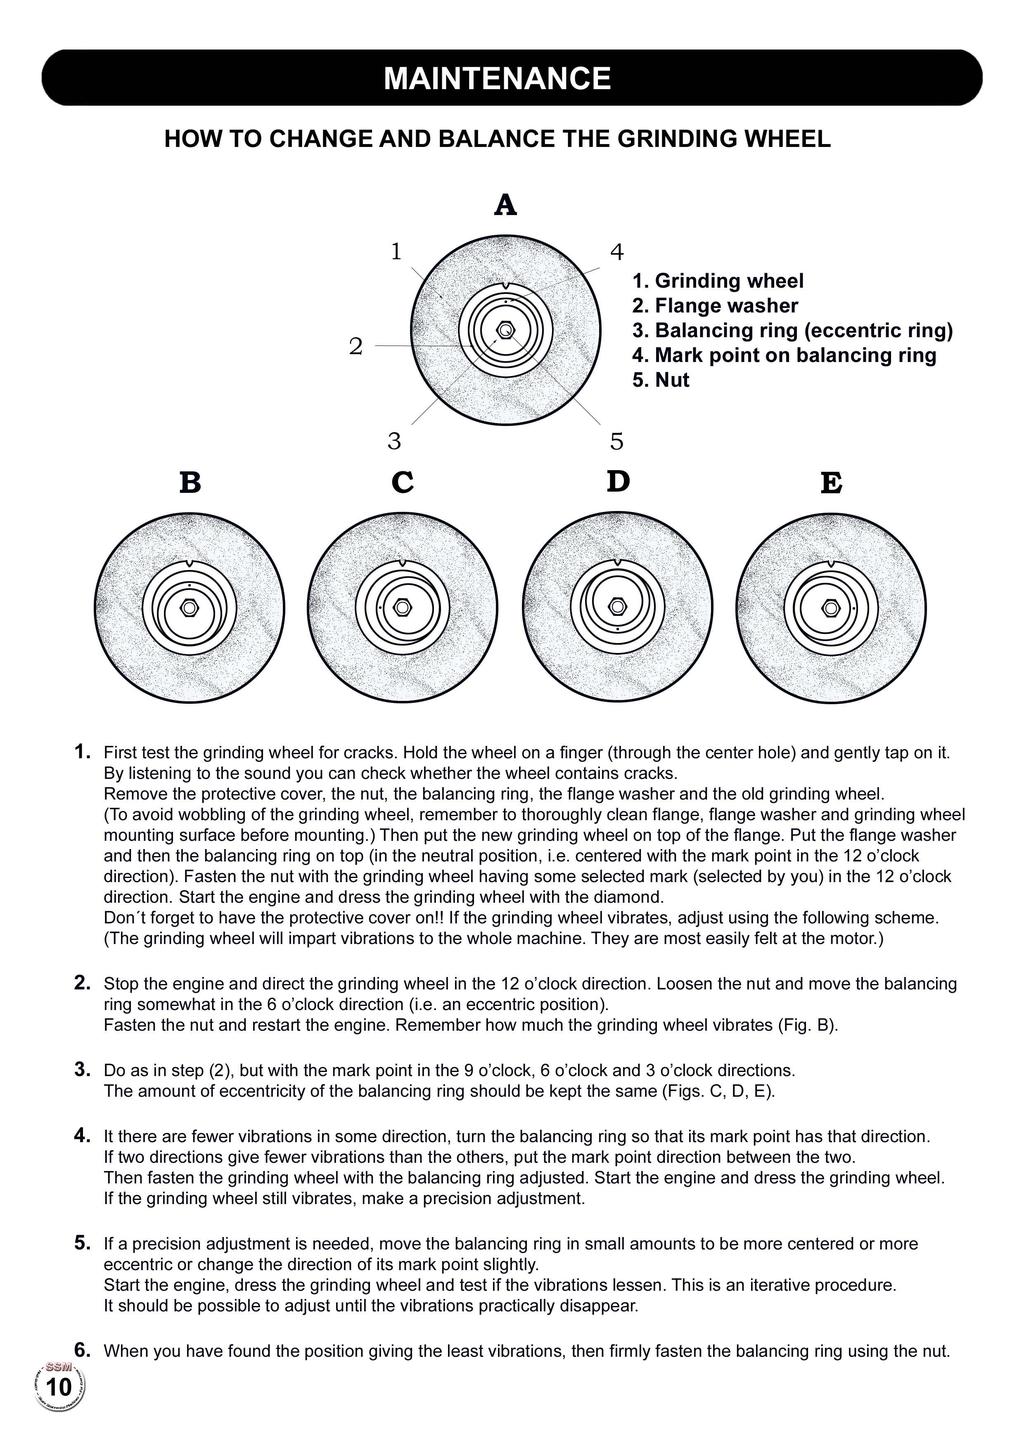 MAINTENANCE HOW TO CHANGE AND BALANCE THE GRINDING WHEEL A 2 1 4 1. Grinding wheel 2. Flange washer 3. Balancing ring (eccentric ring) 4. Mark point on balancing ring 5. Nut 3 5 B C D E 1.